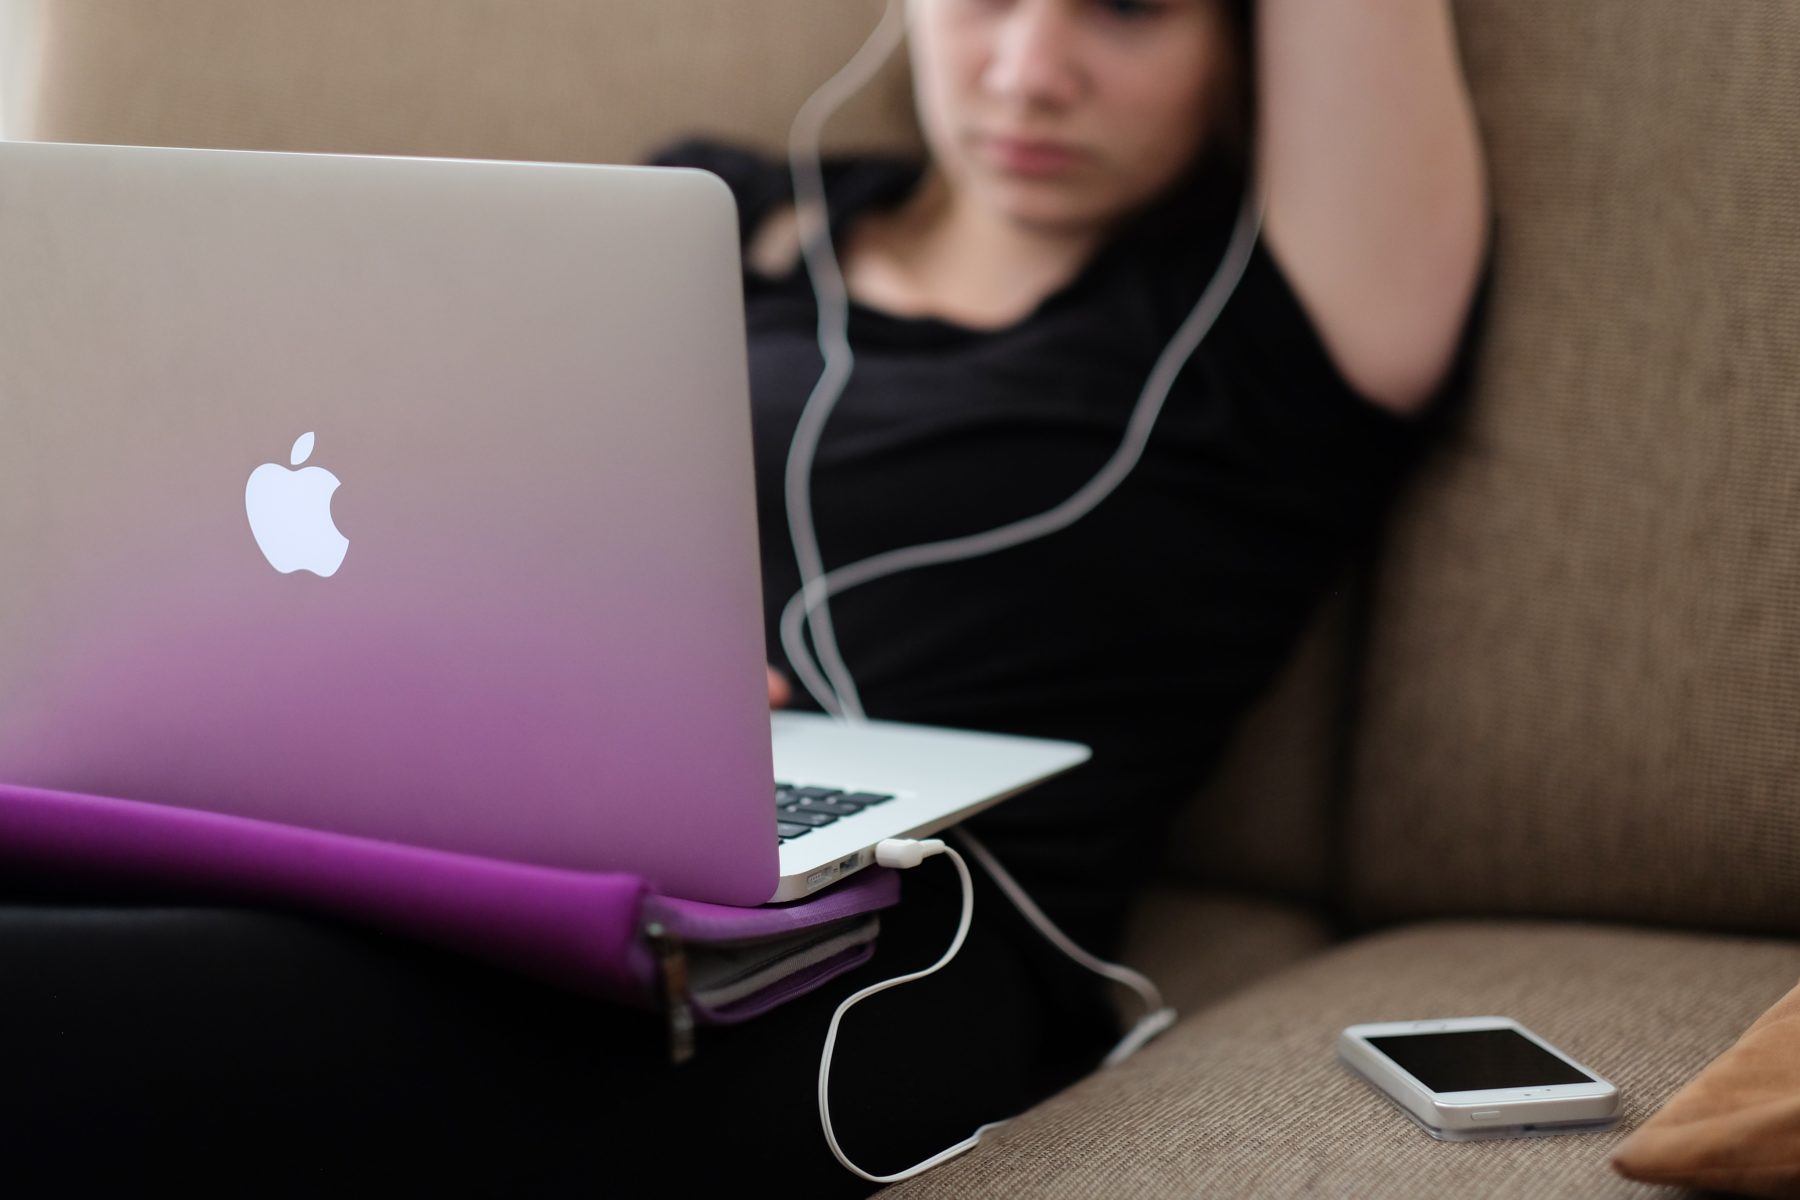 A young girl listening to music on her Apple Macbook with her iphone resting next to her.